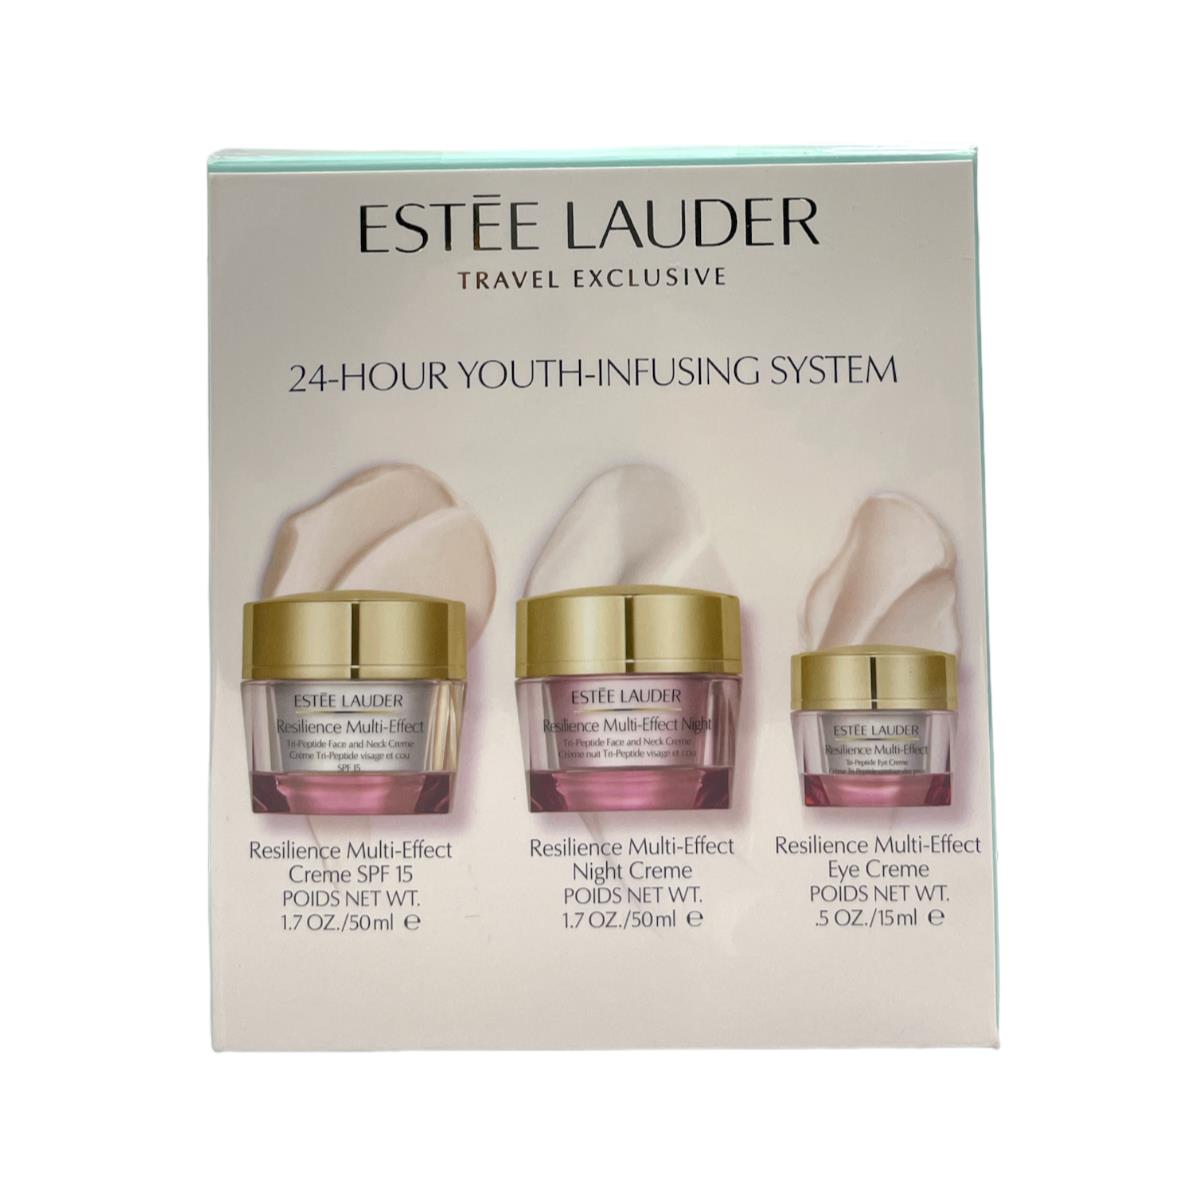 Estee Lauder Travel Exclusive 24-Horas Youth-infusing System 3.9oz/115ml